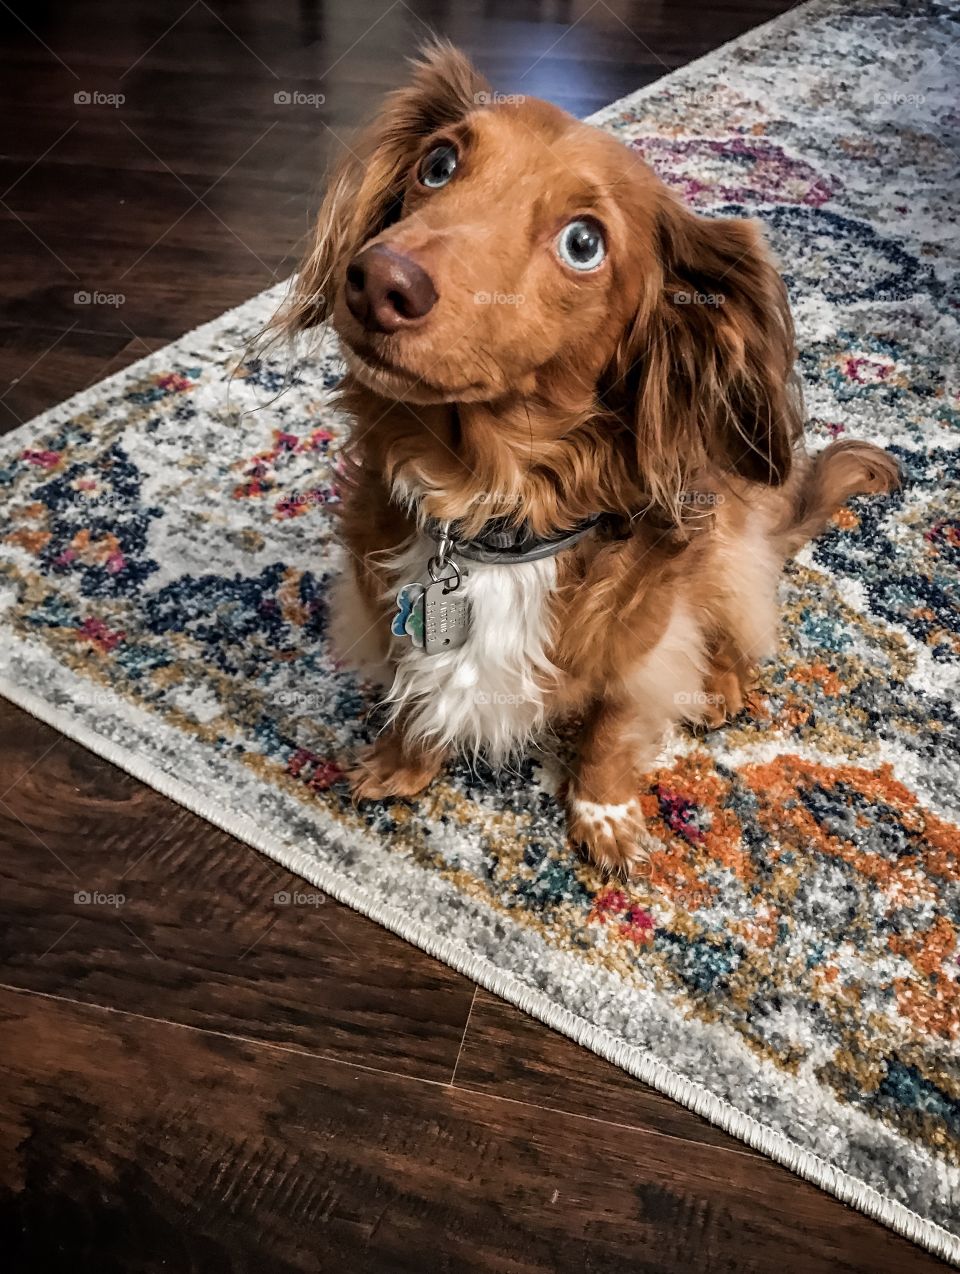 Long haired mini dapple dachshund with brown nose and blue eyes sitting with head tilted on colorful area rug